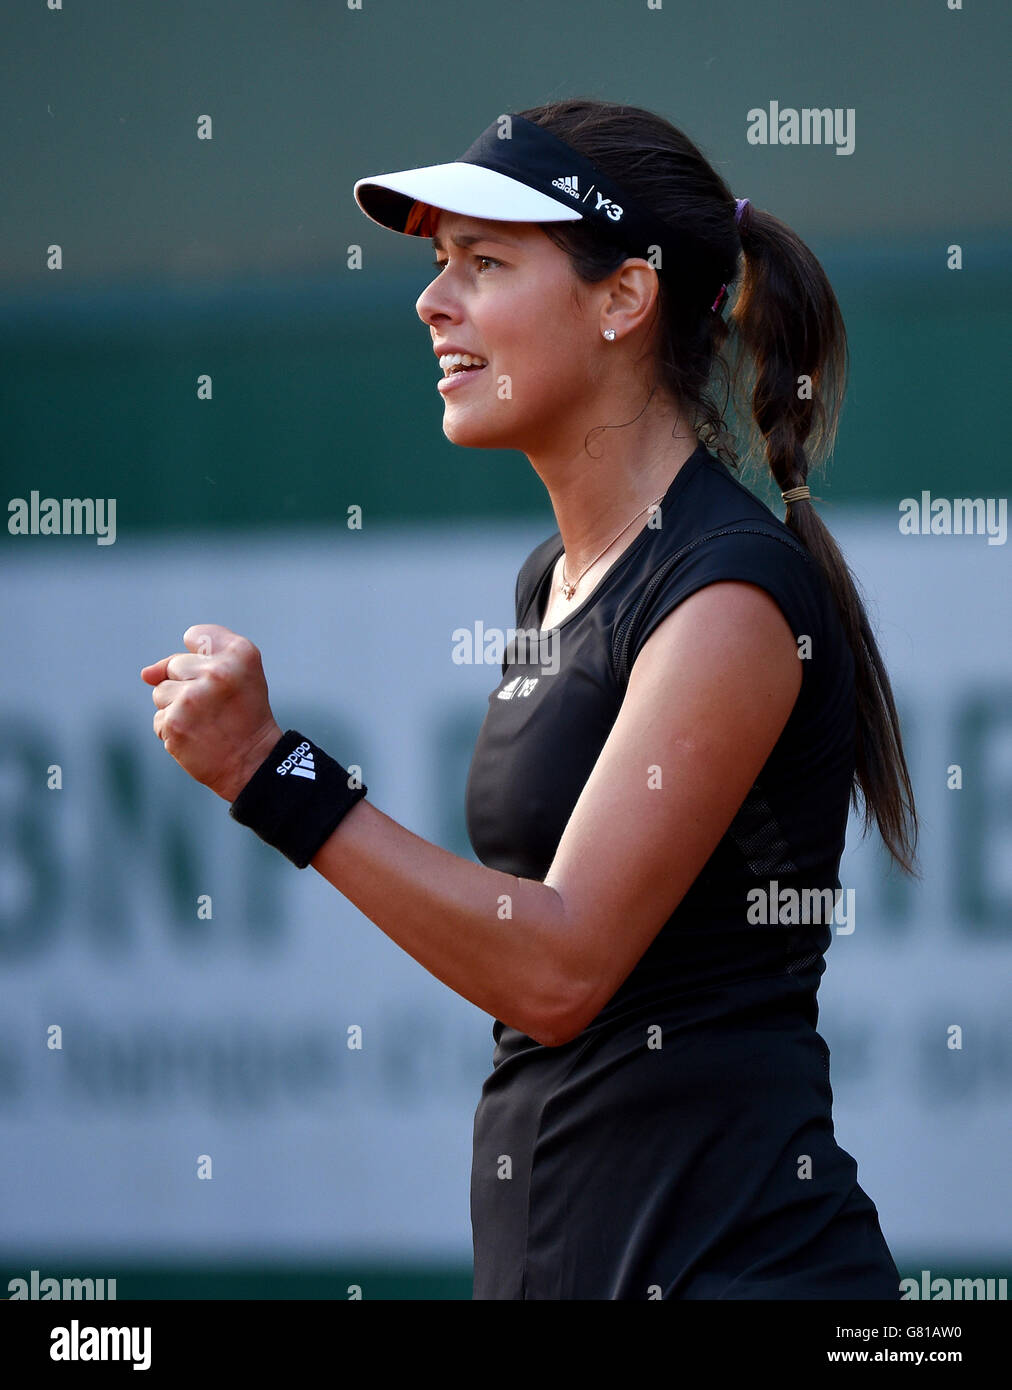 Ana Ivanovic in action during her Second round women's singles match against Misaki Doi on day four of the French Open at Roland Garros on May 27, 2015 in Paris, France Stock Photo